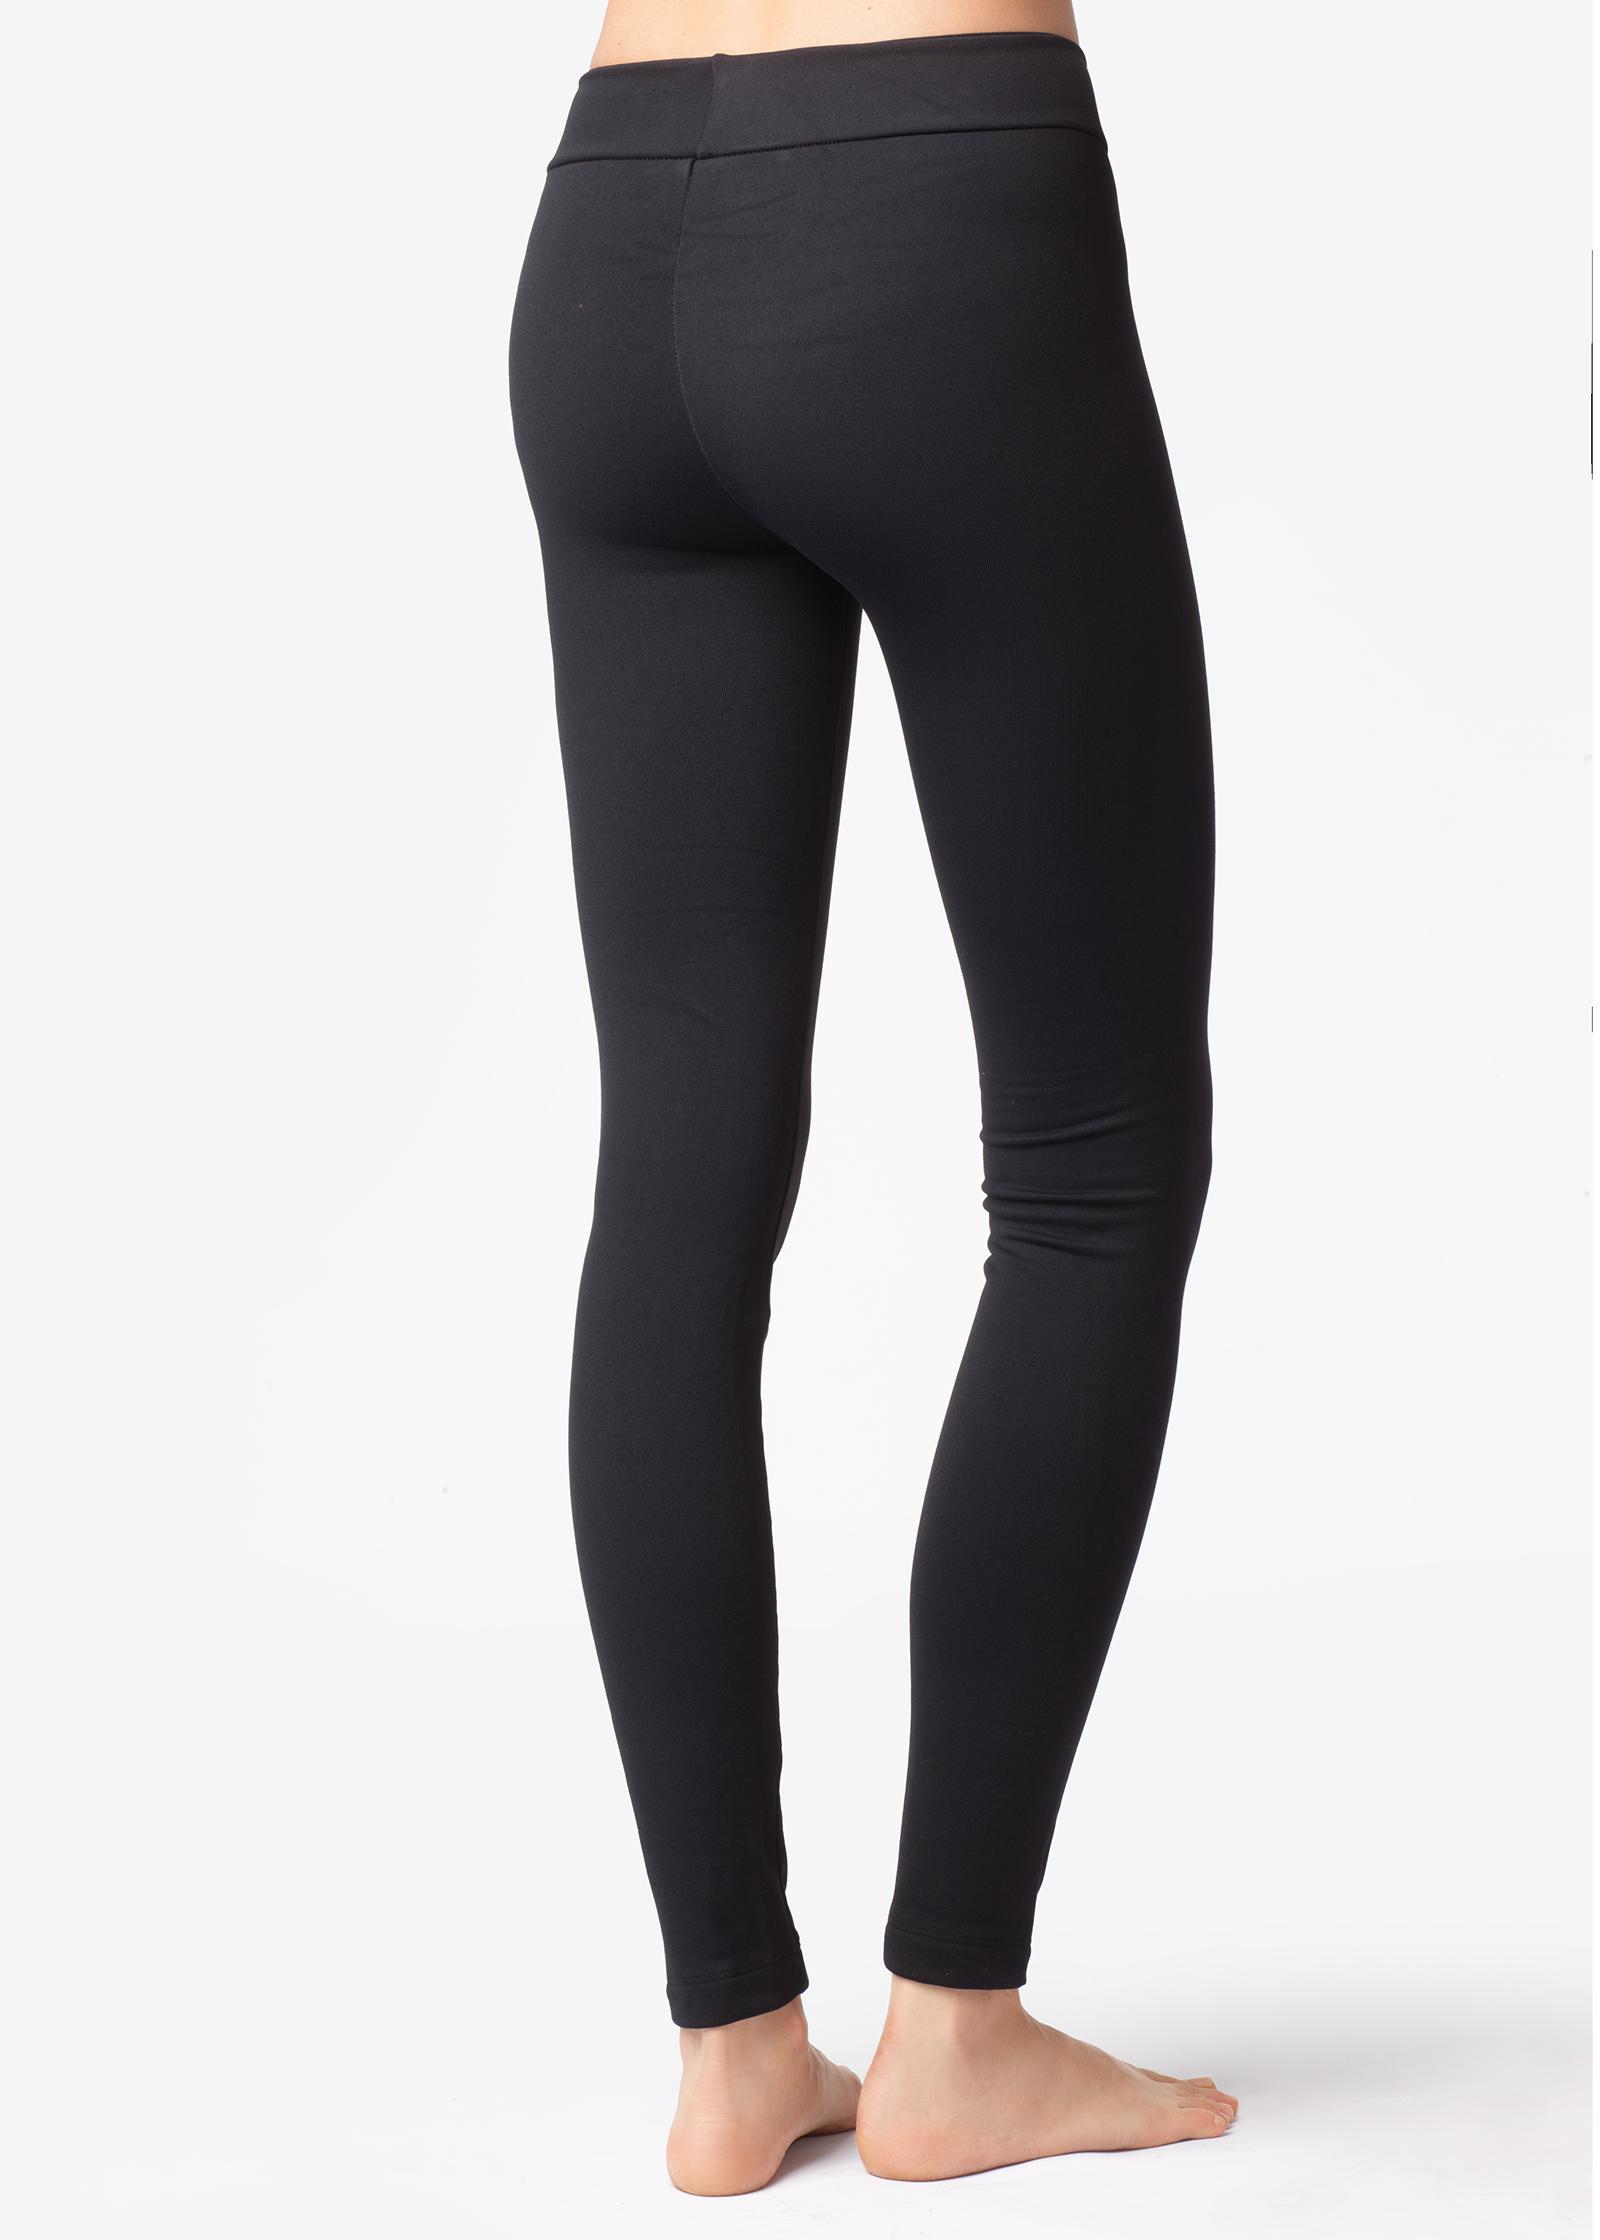 calzedonia thermal tights,www.autoconnective.in